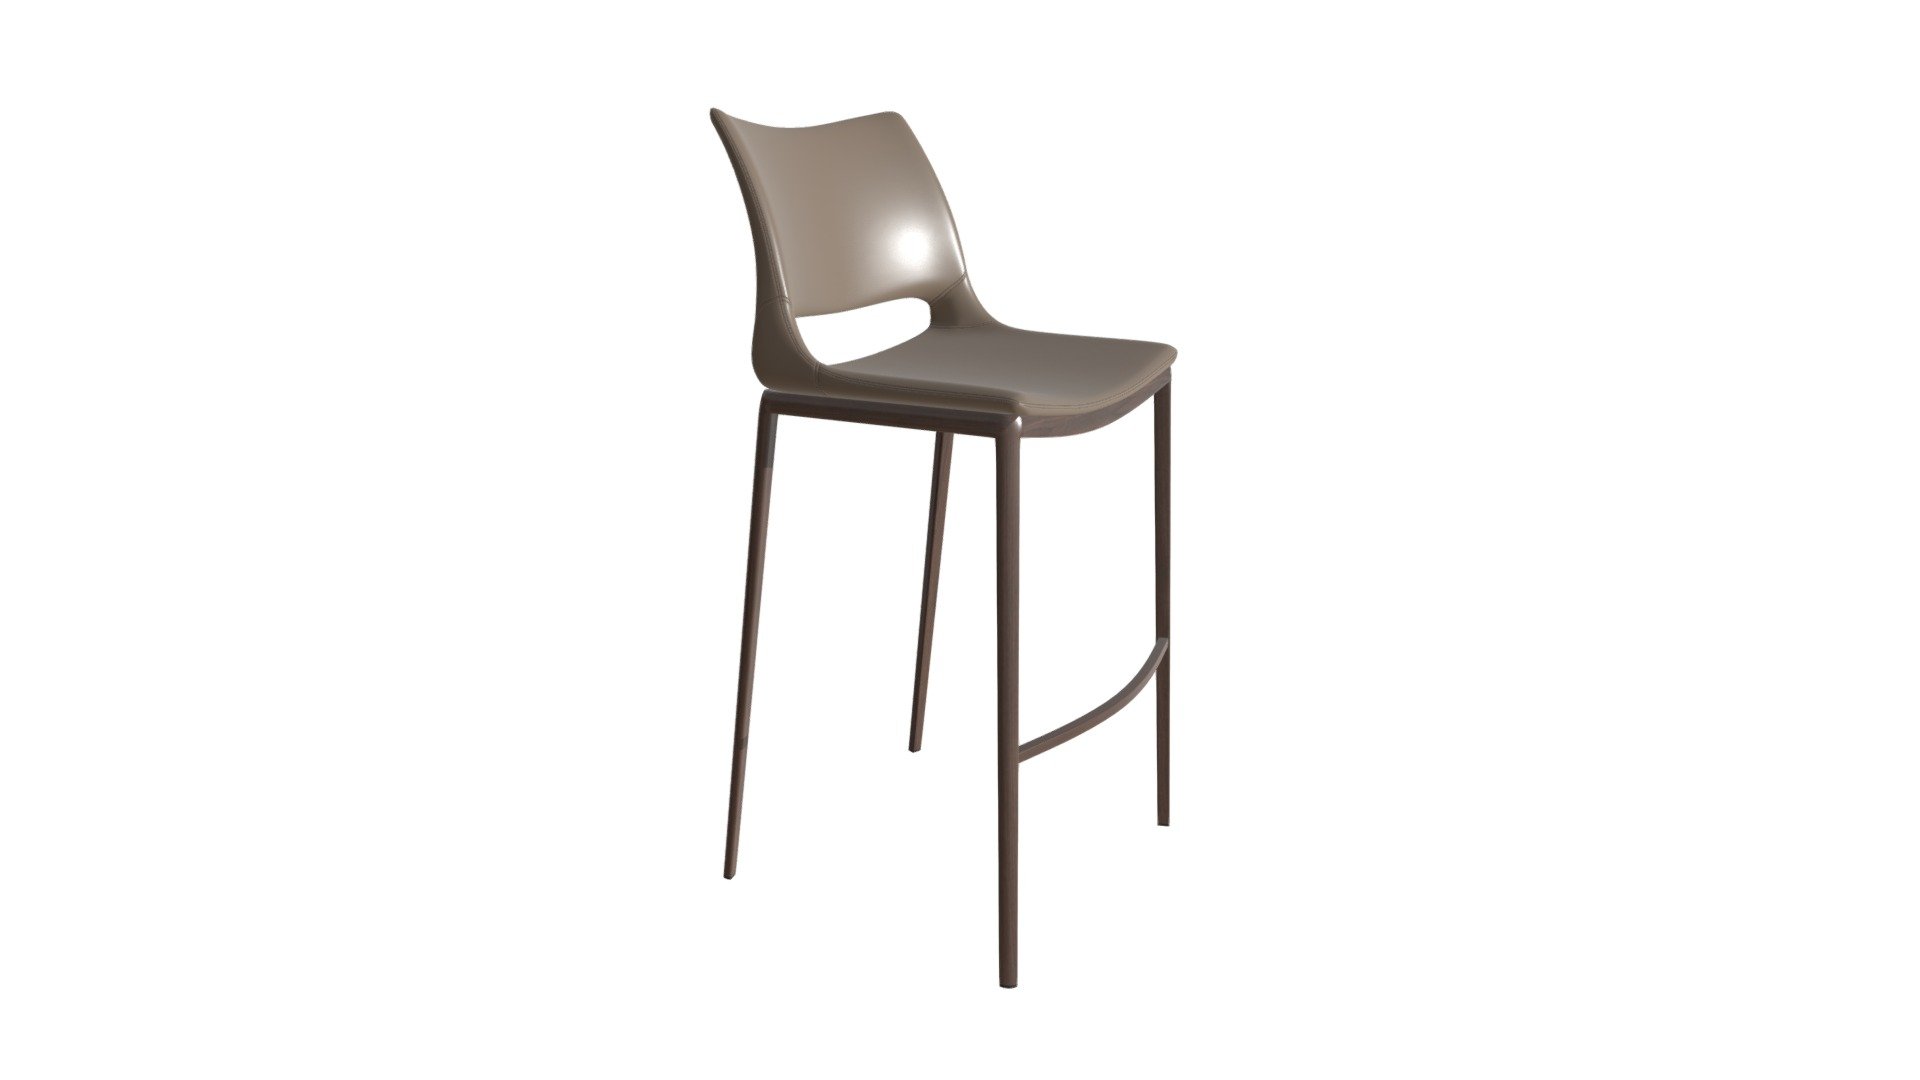 https://zuomod.com/ace-bar-chair-gray-walnut 

Built for comfort, this ergonomic bar chair is the perfect solution for your home or office space. A stainless steel frame in walnut brown plays a supporting role while the built-in curved footrest keeps you firmly planted. Gray faux leather seat deck is sleek and modern, making this bar chair the perfect compliment to any room setting 3d model